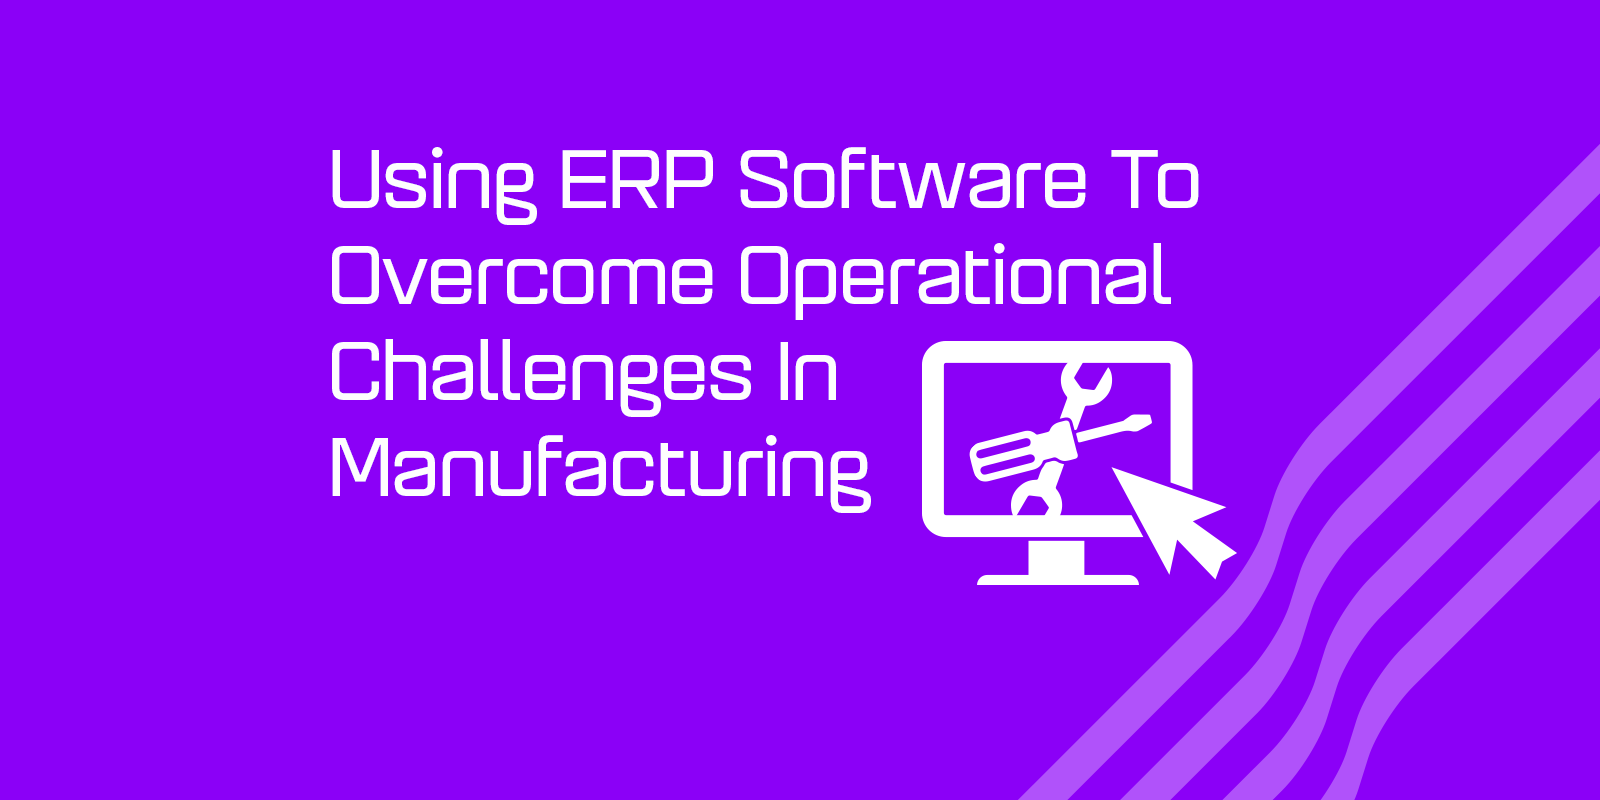 Using ERP Software To Overcome Operational Challenges In Manufacturing